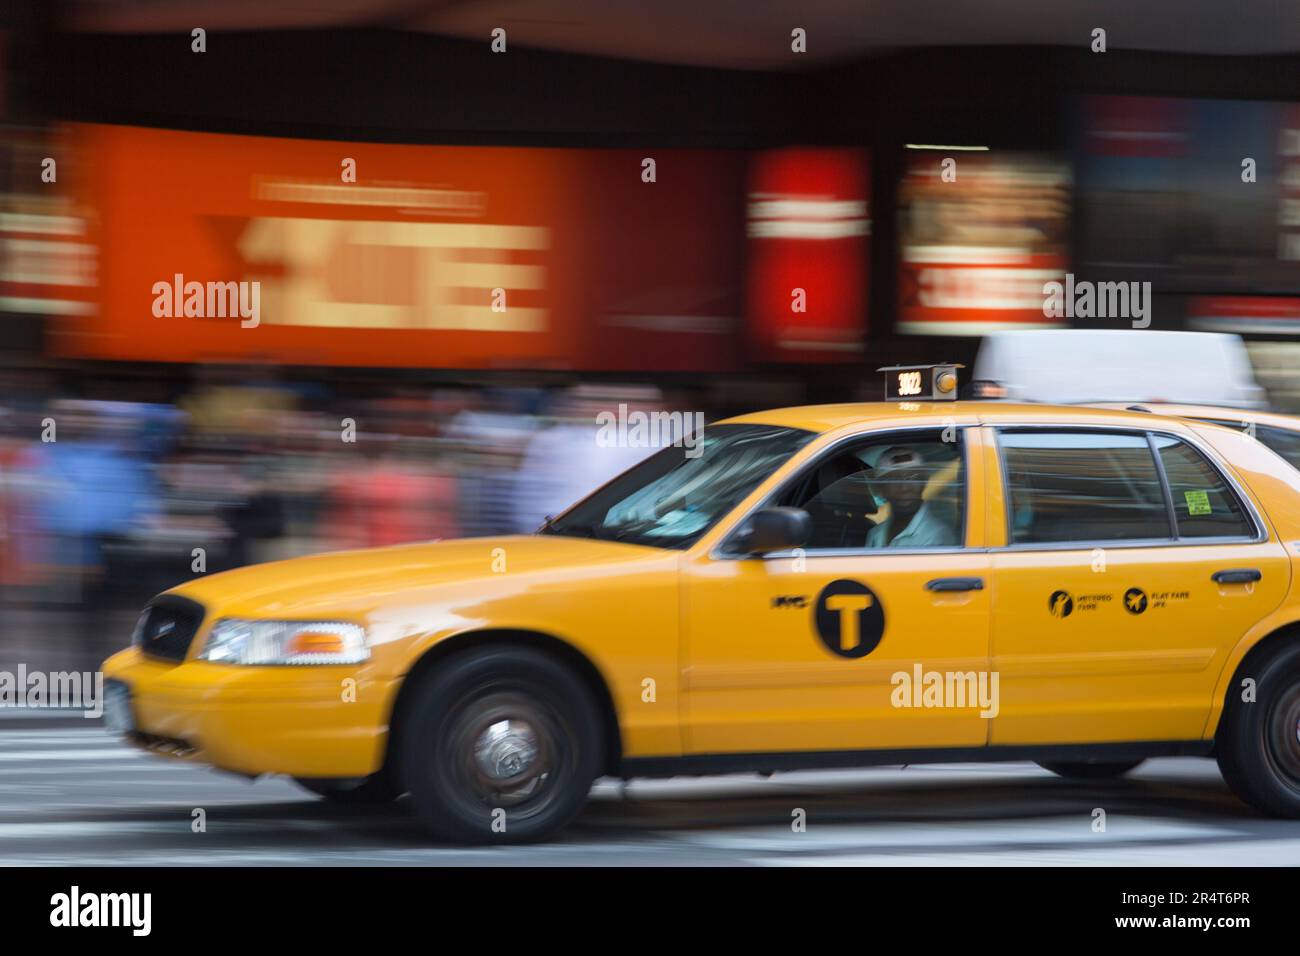 US, New York, Yellow taxi cabs along 7th avenue. Stock Photo